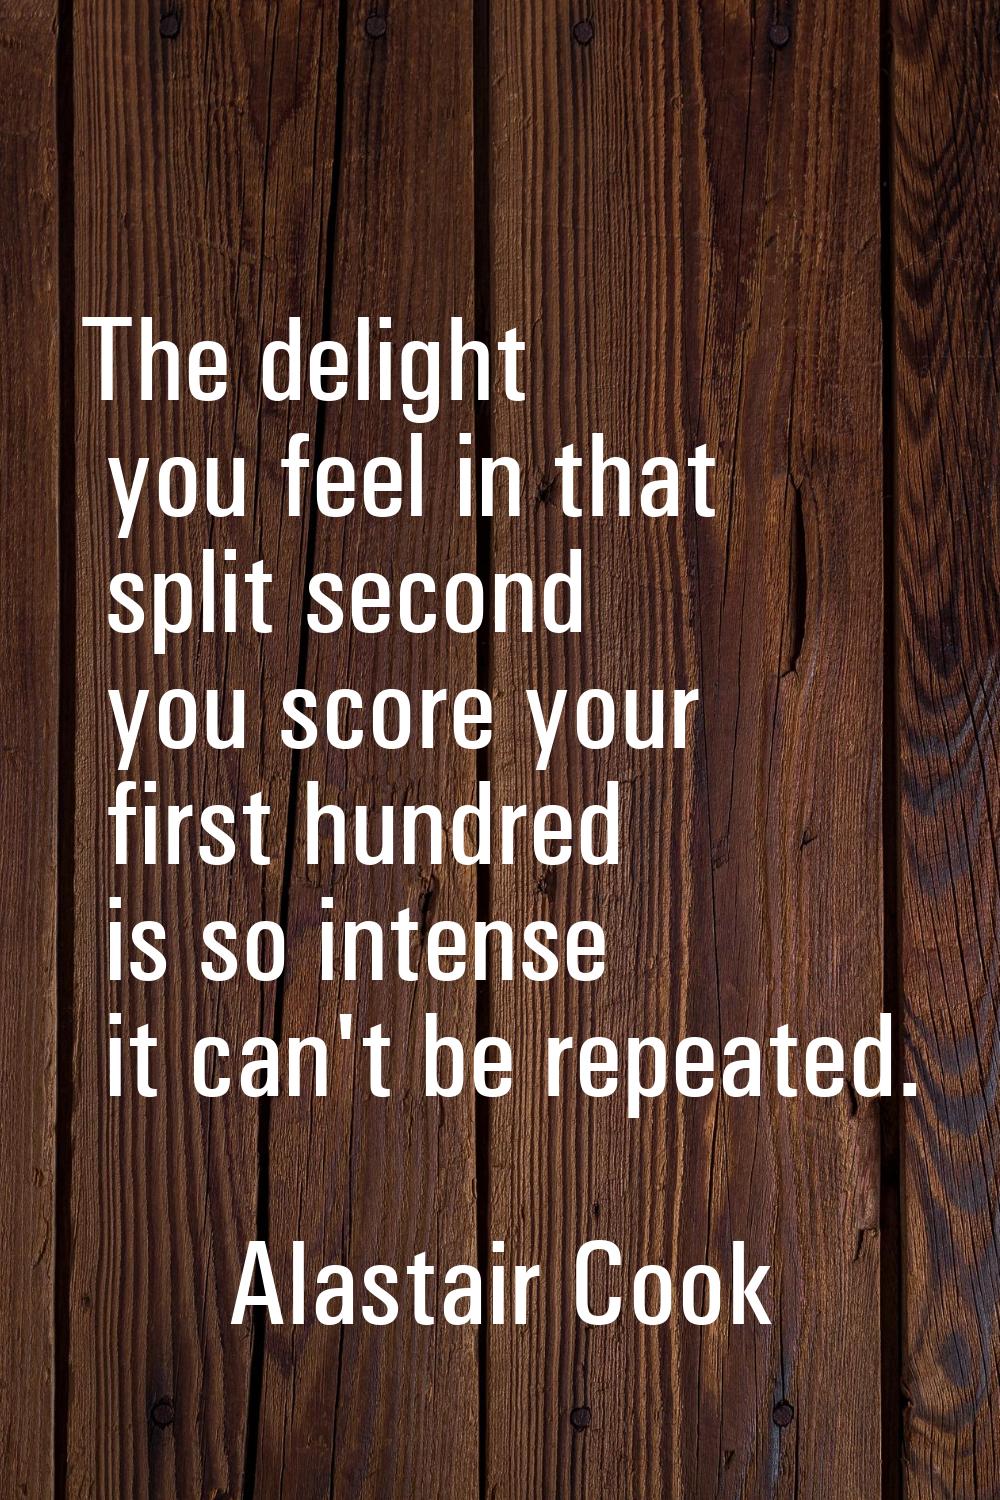 The delight you feel in that split second you score your first hundred is so intense it can't be re